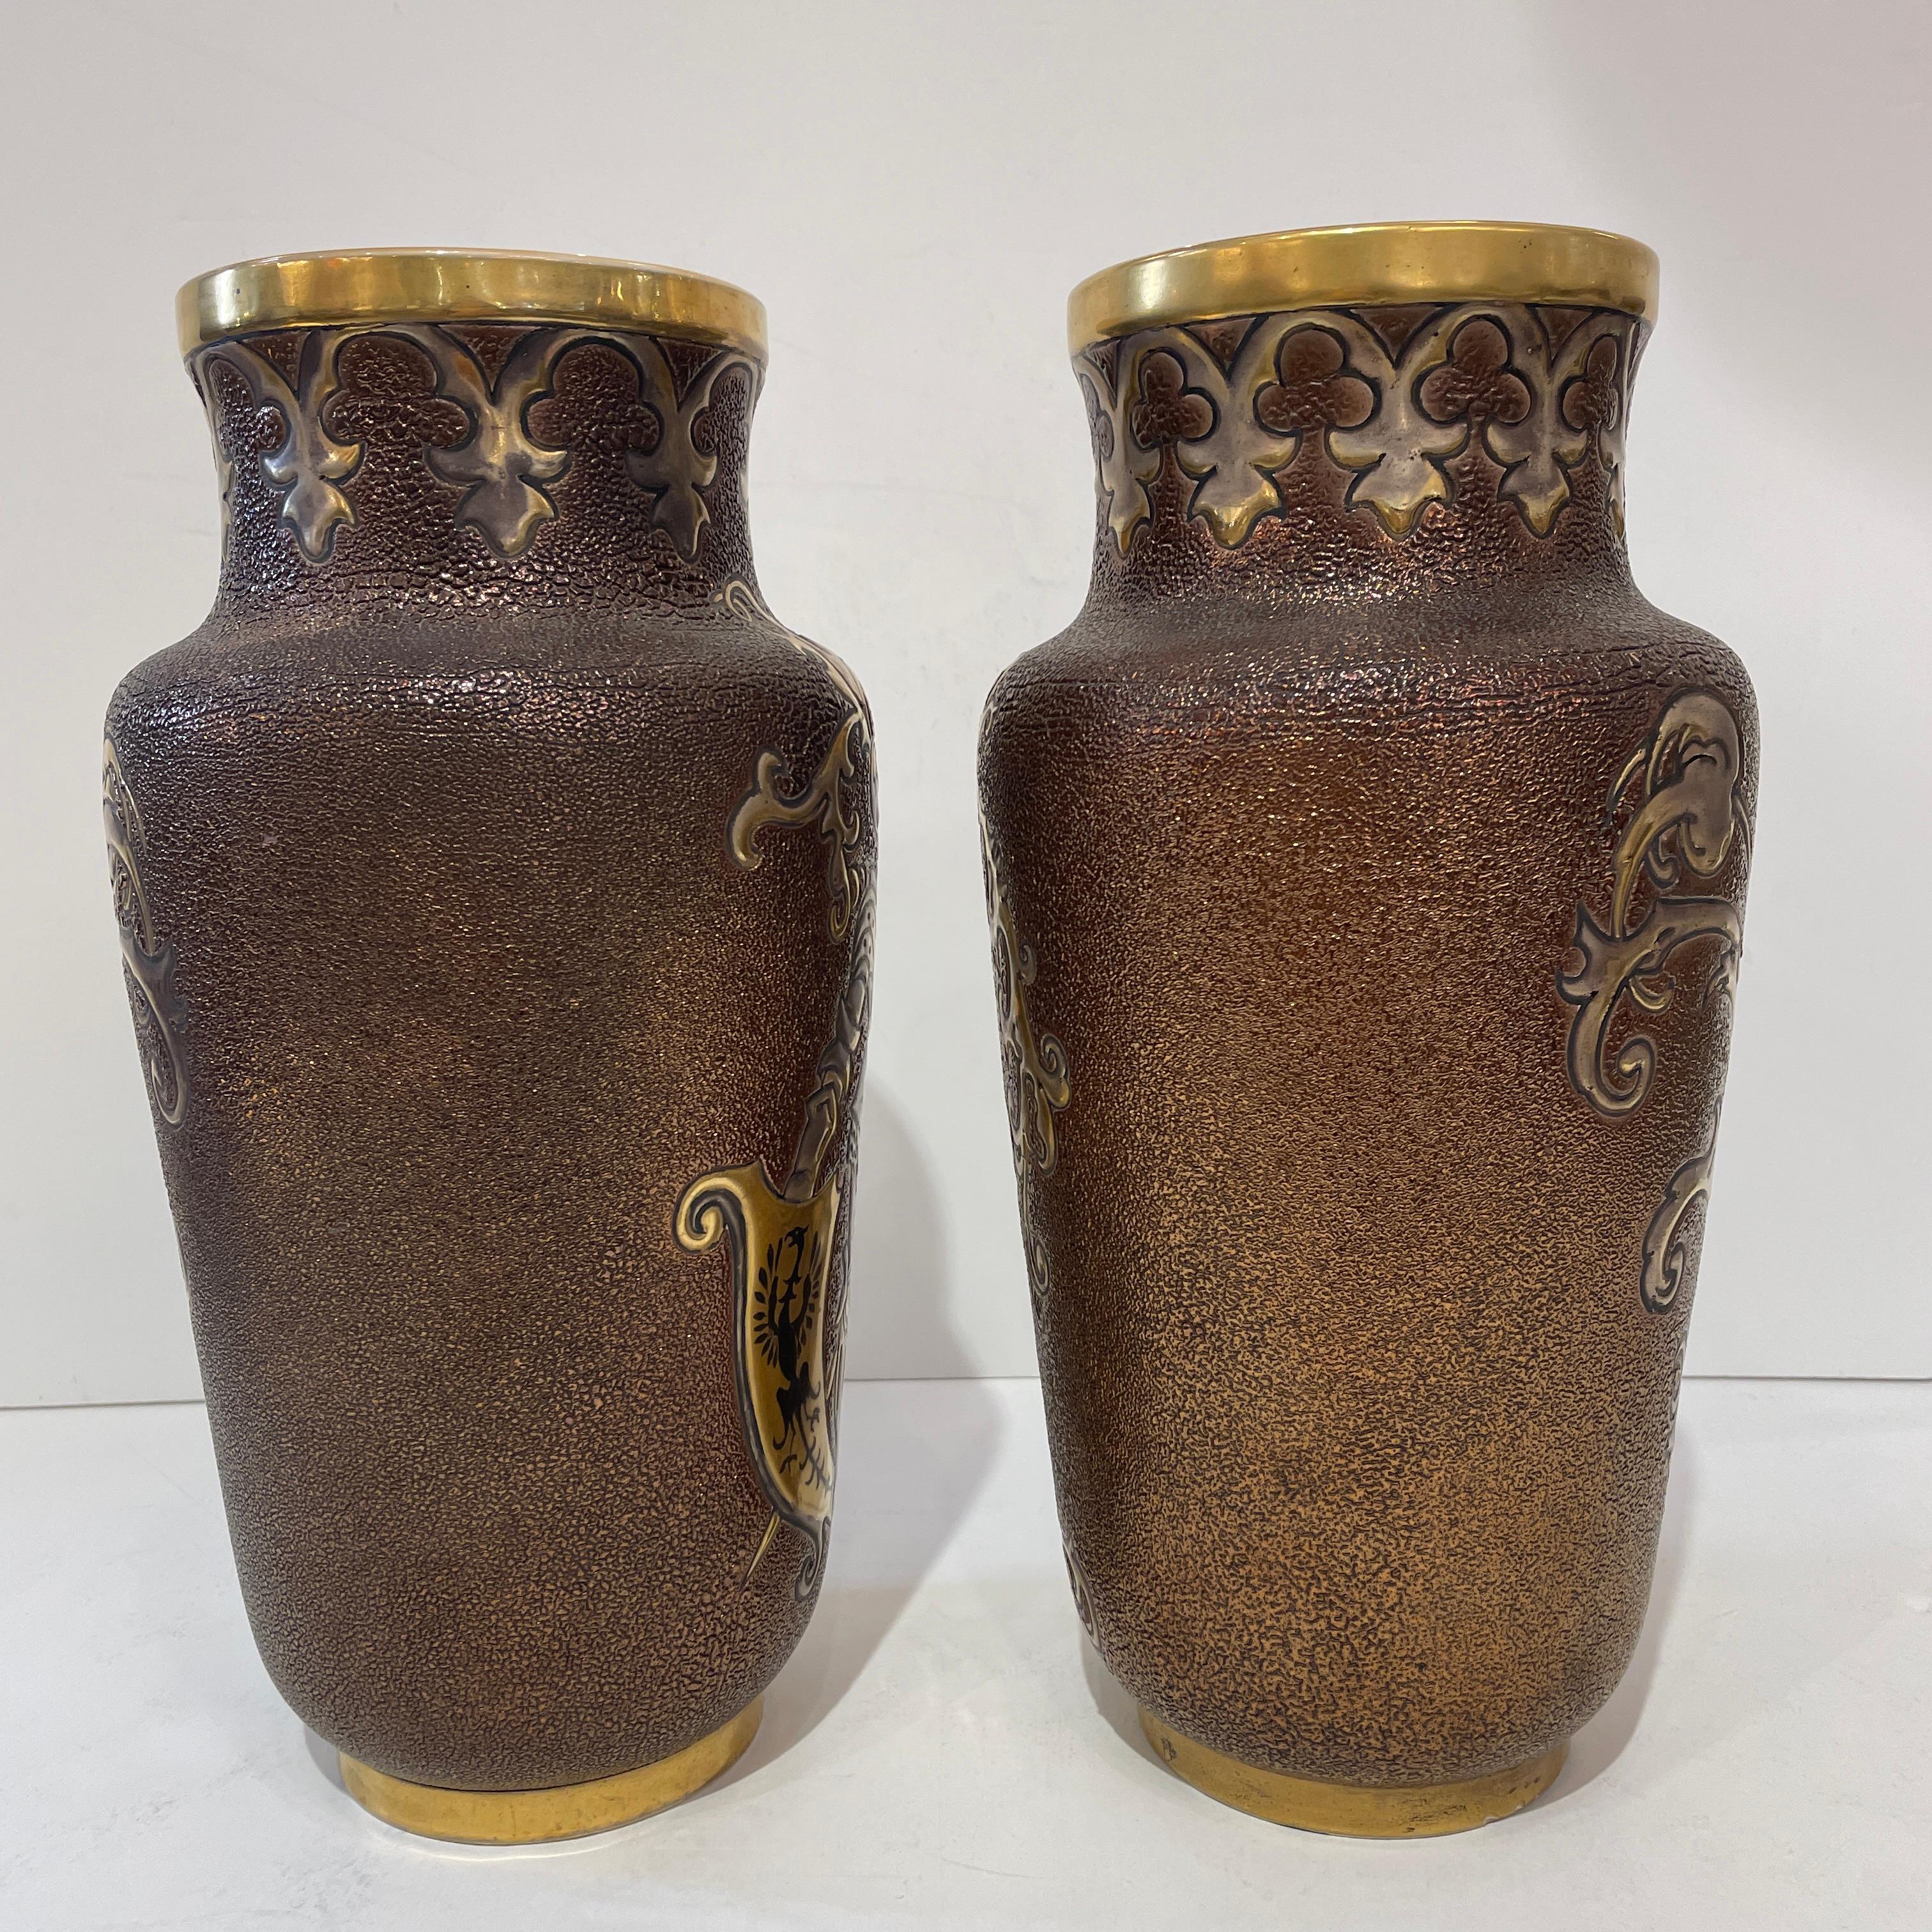 A very rare signed pair of Faience vases produced by the prestigious French Gien factory, with a unique enameling technique called 